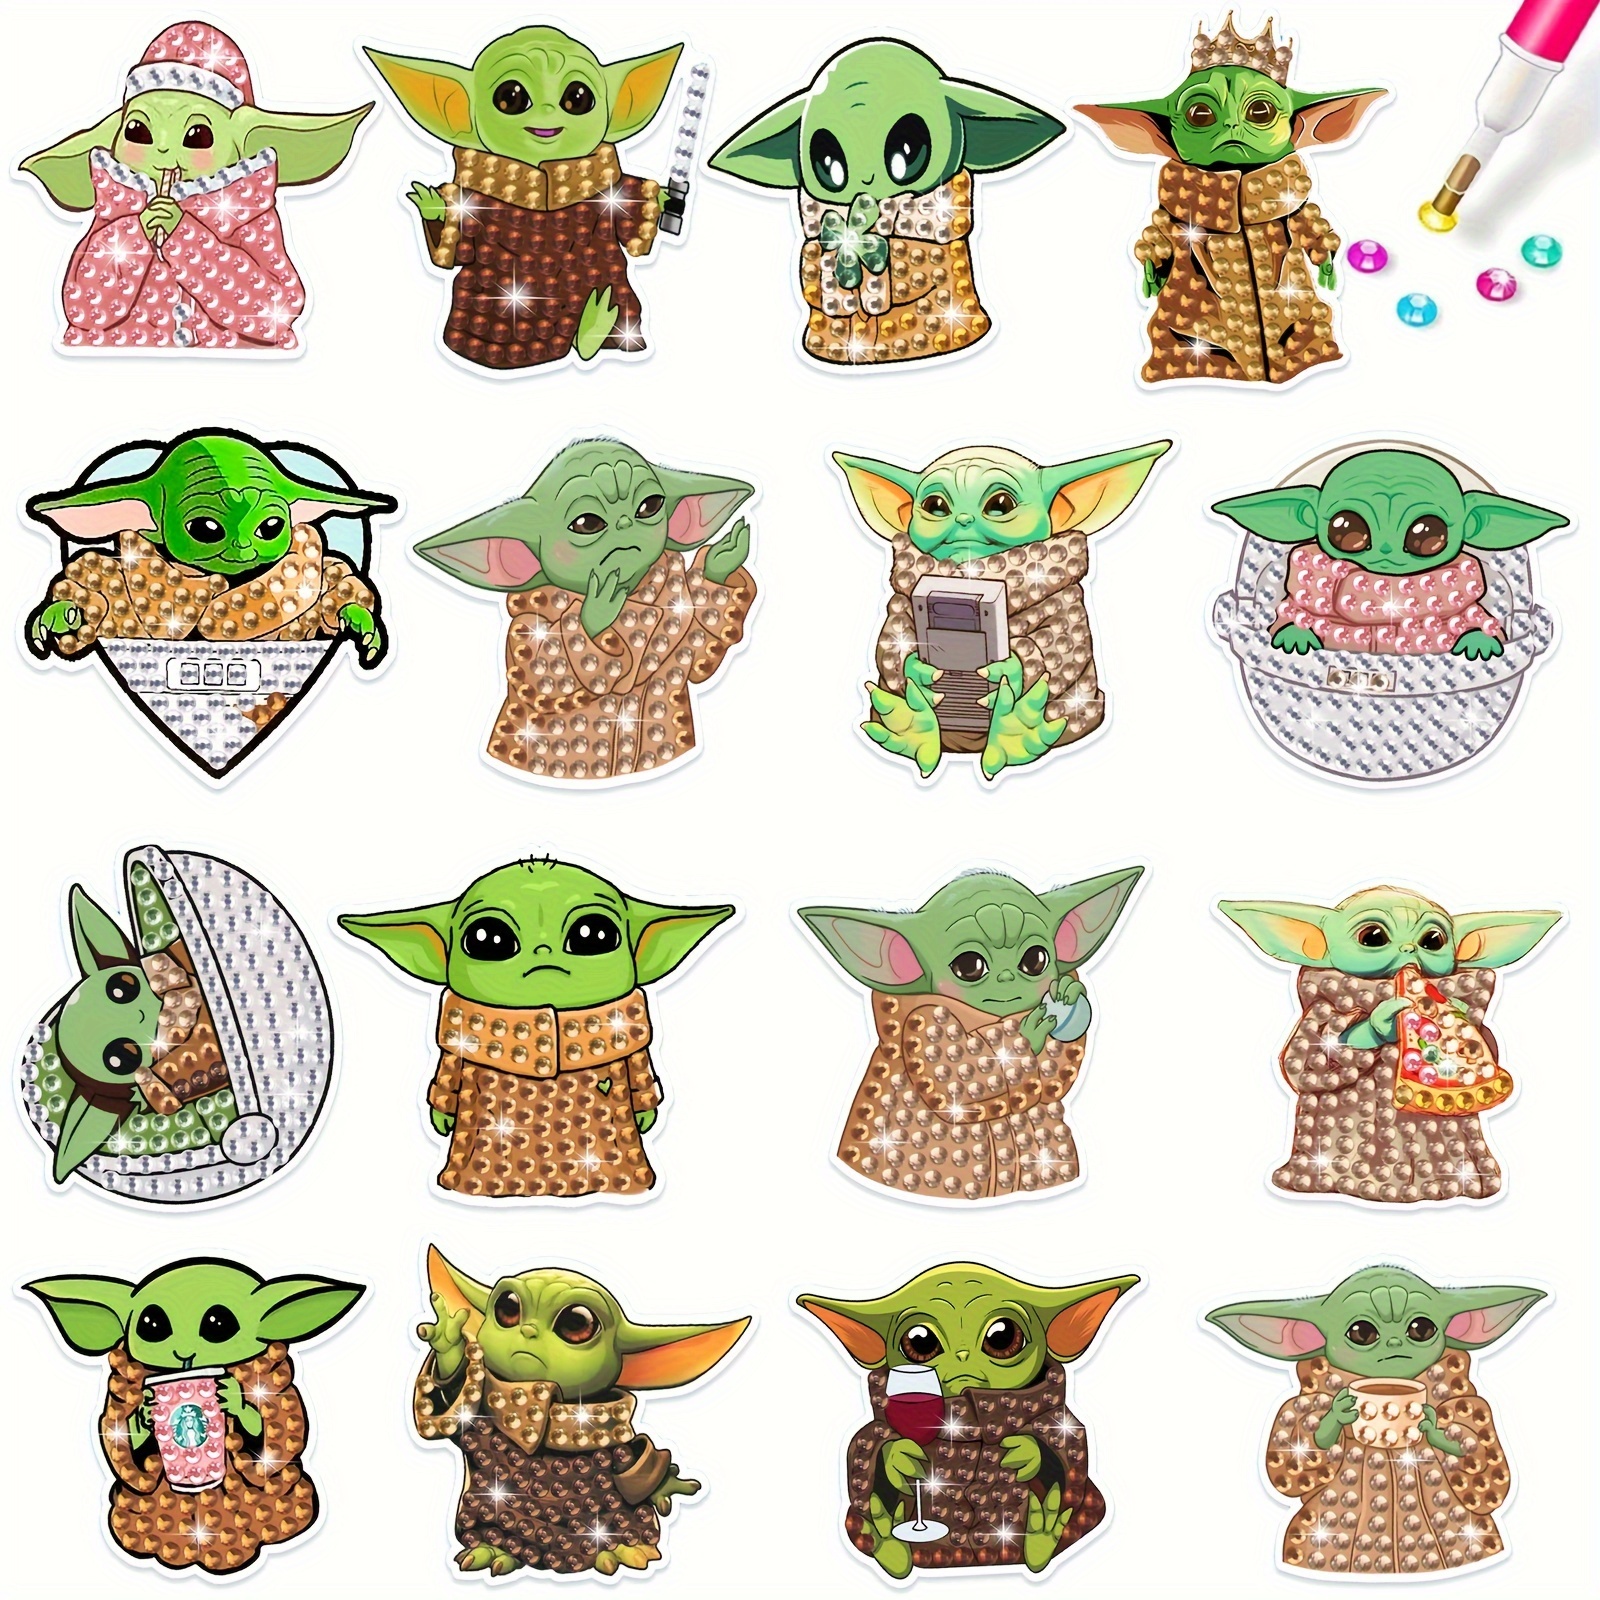 

Disney Yoda Diy Diamond Art Painting Stickers Diamond Art Mosaic Embroidery Stickers With Diy Painting Tools To Create Your Own Magical Stickers.